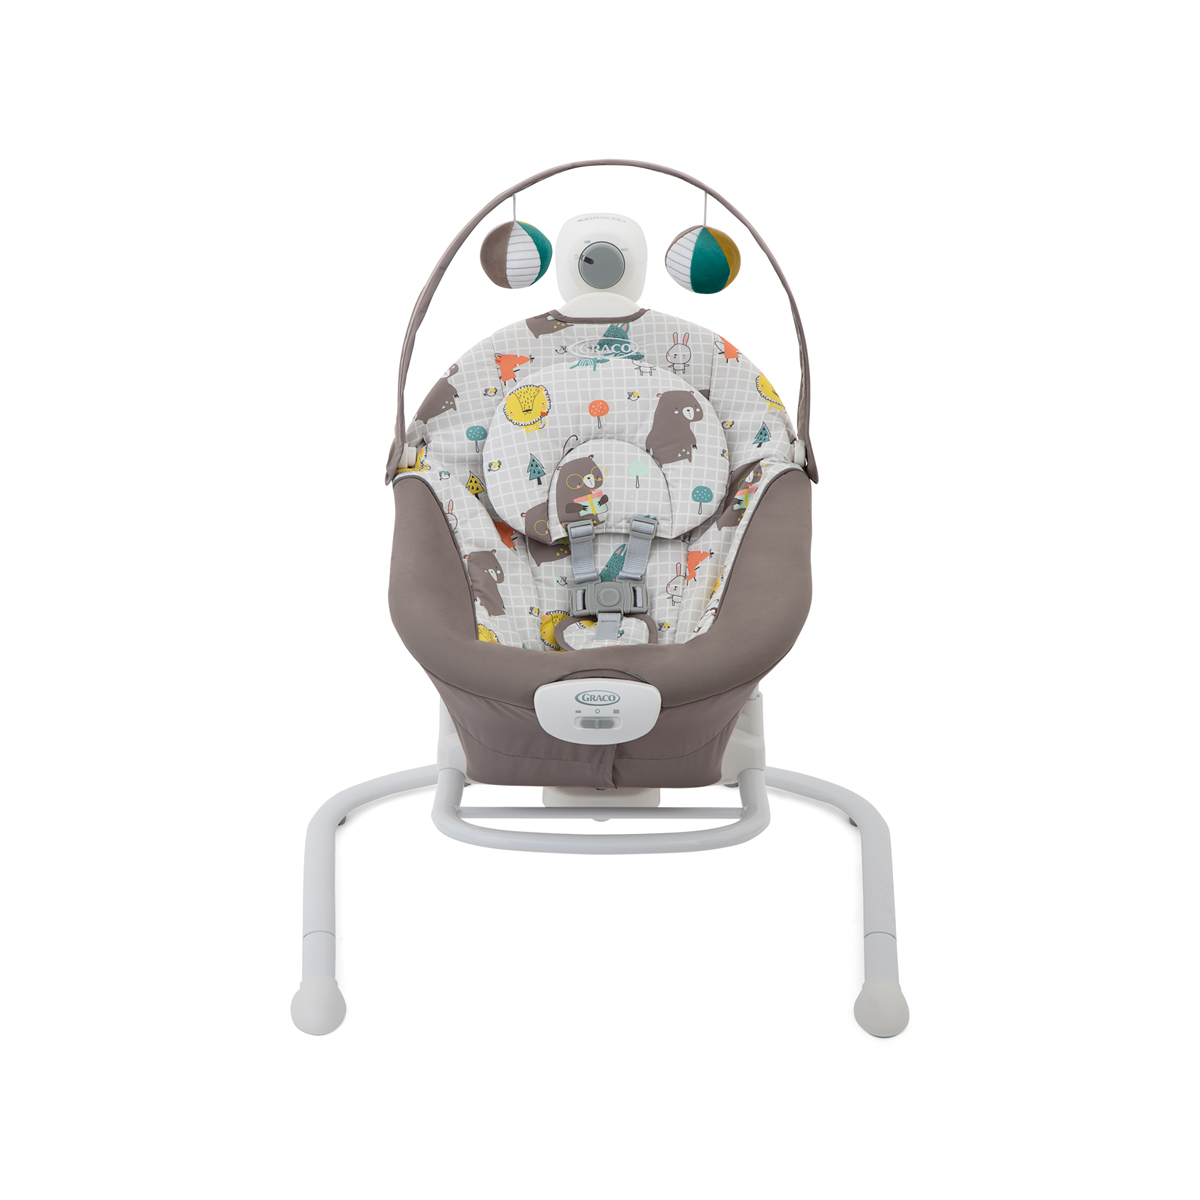 Graco Duet Sway™ front angle